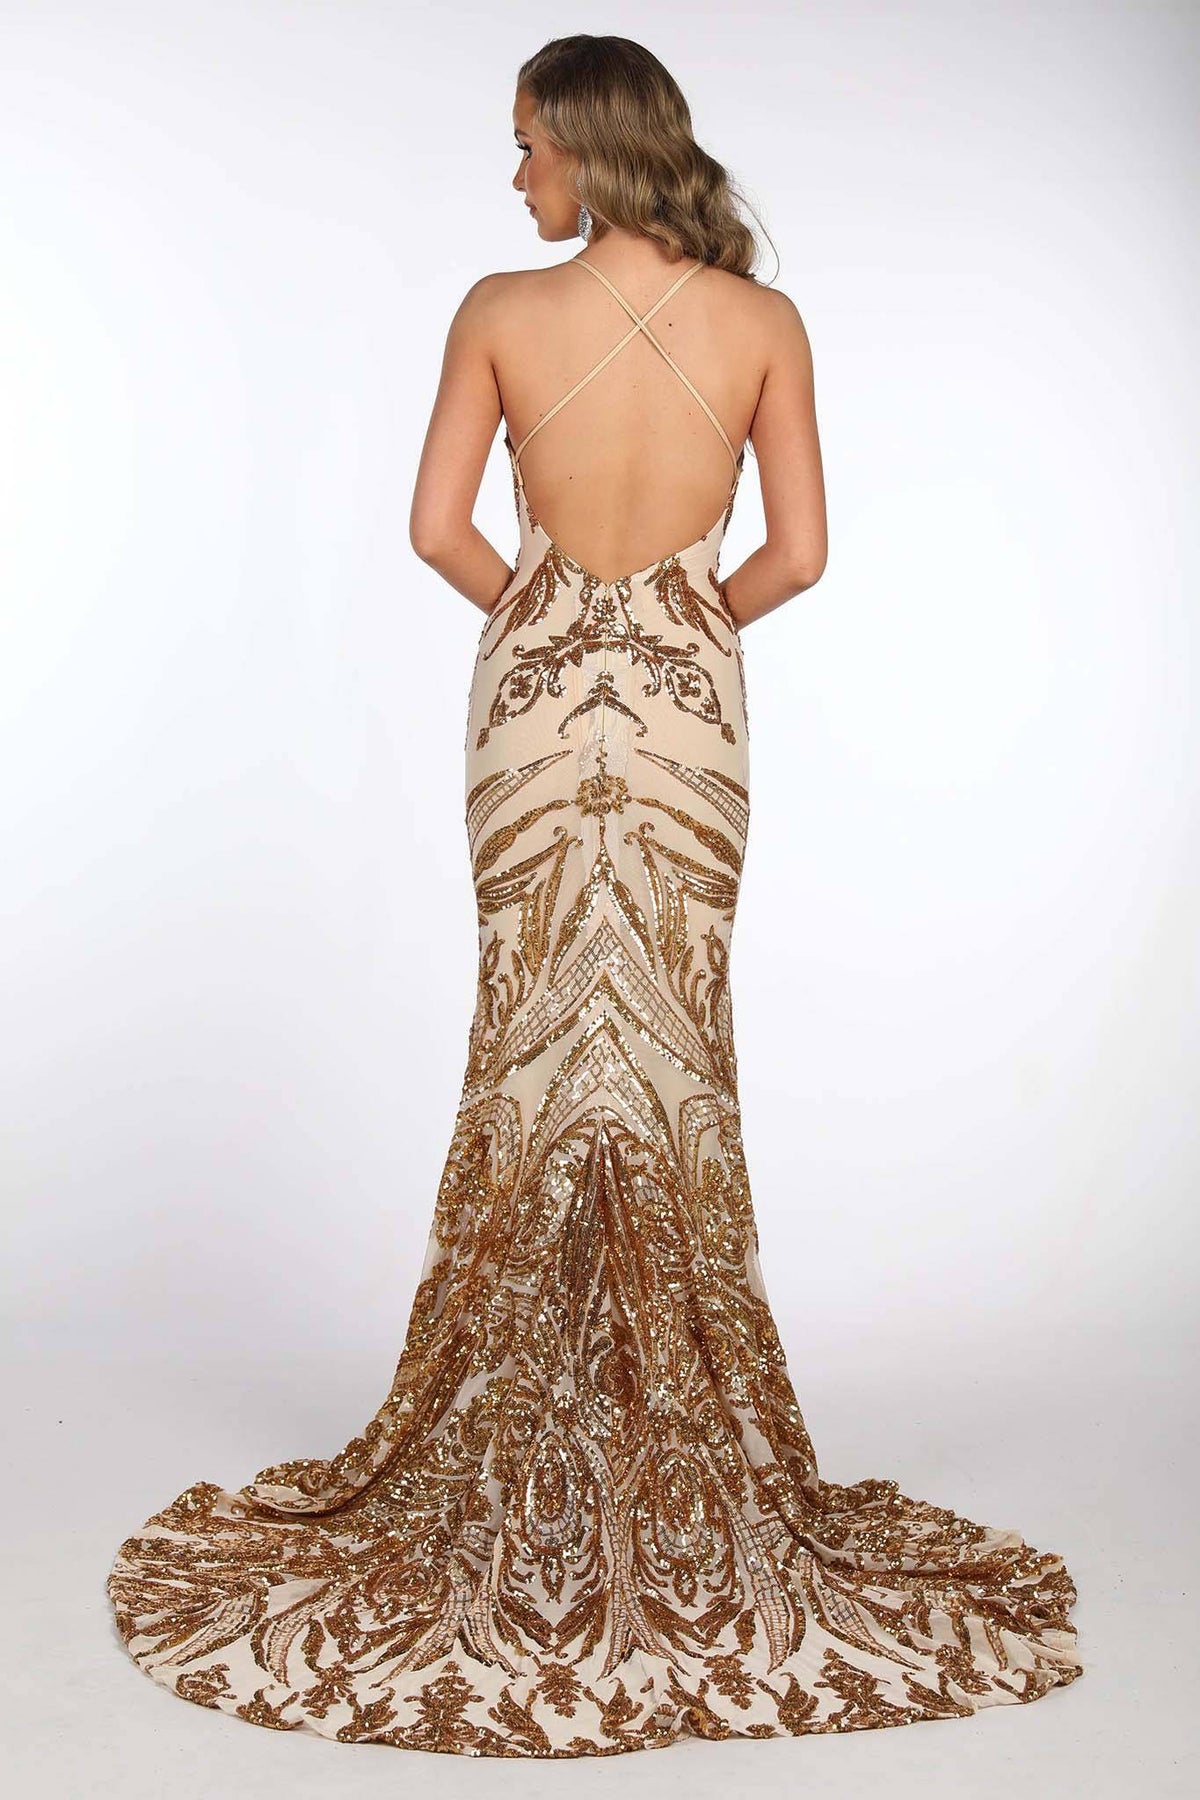 Criss-cross straps on open back design of Gold Full Length Evening Sequin Gown with Gold Embroidered Pattern Sequins Over Beige Underlay, V neckline, Criss-cross Straps on Open Back, Thigh-high Side Slit, Fit and Flare Silhouette and Sweep Train